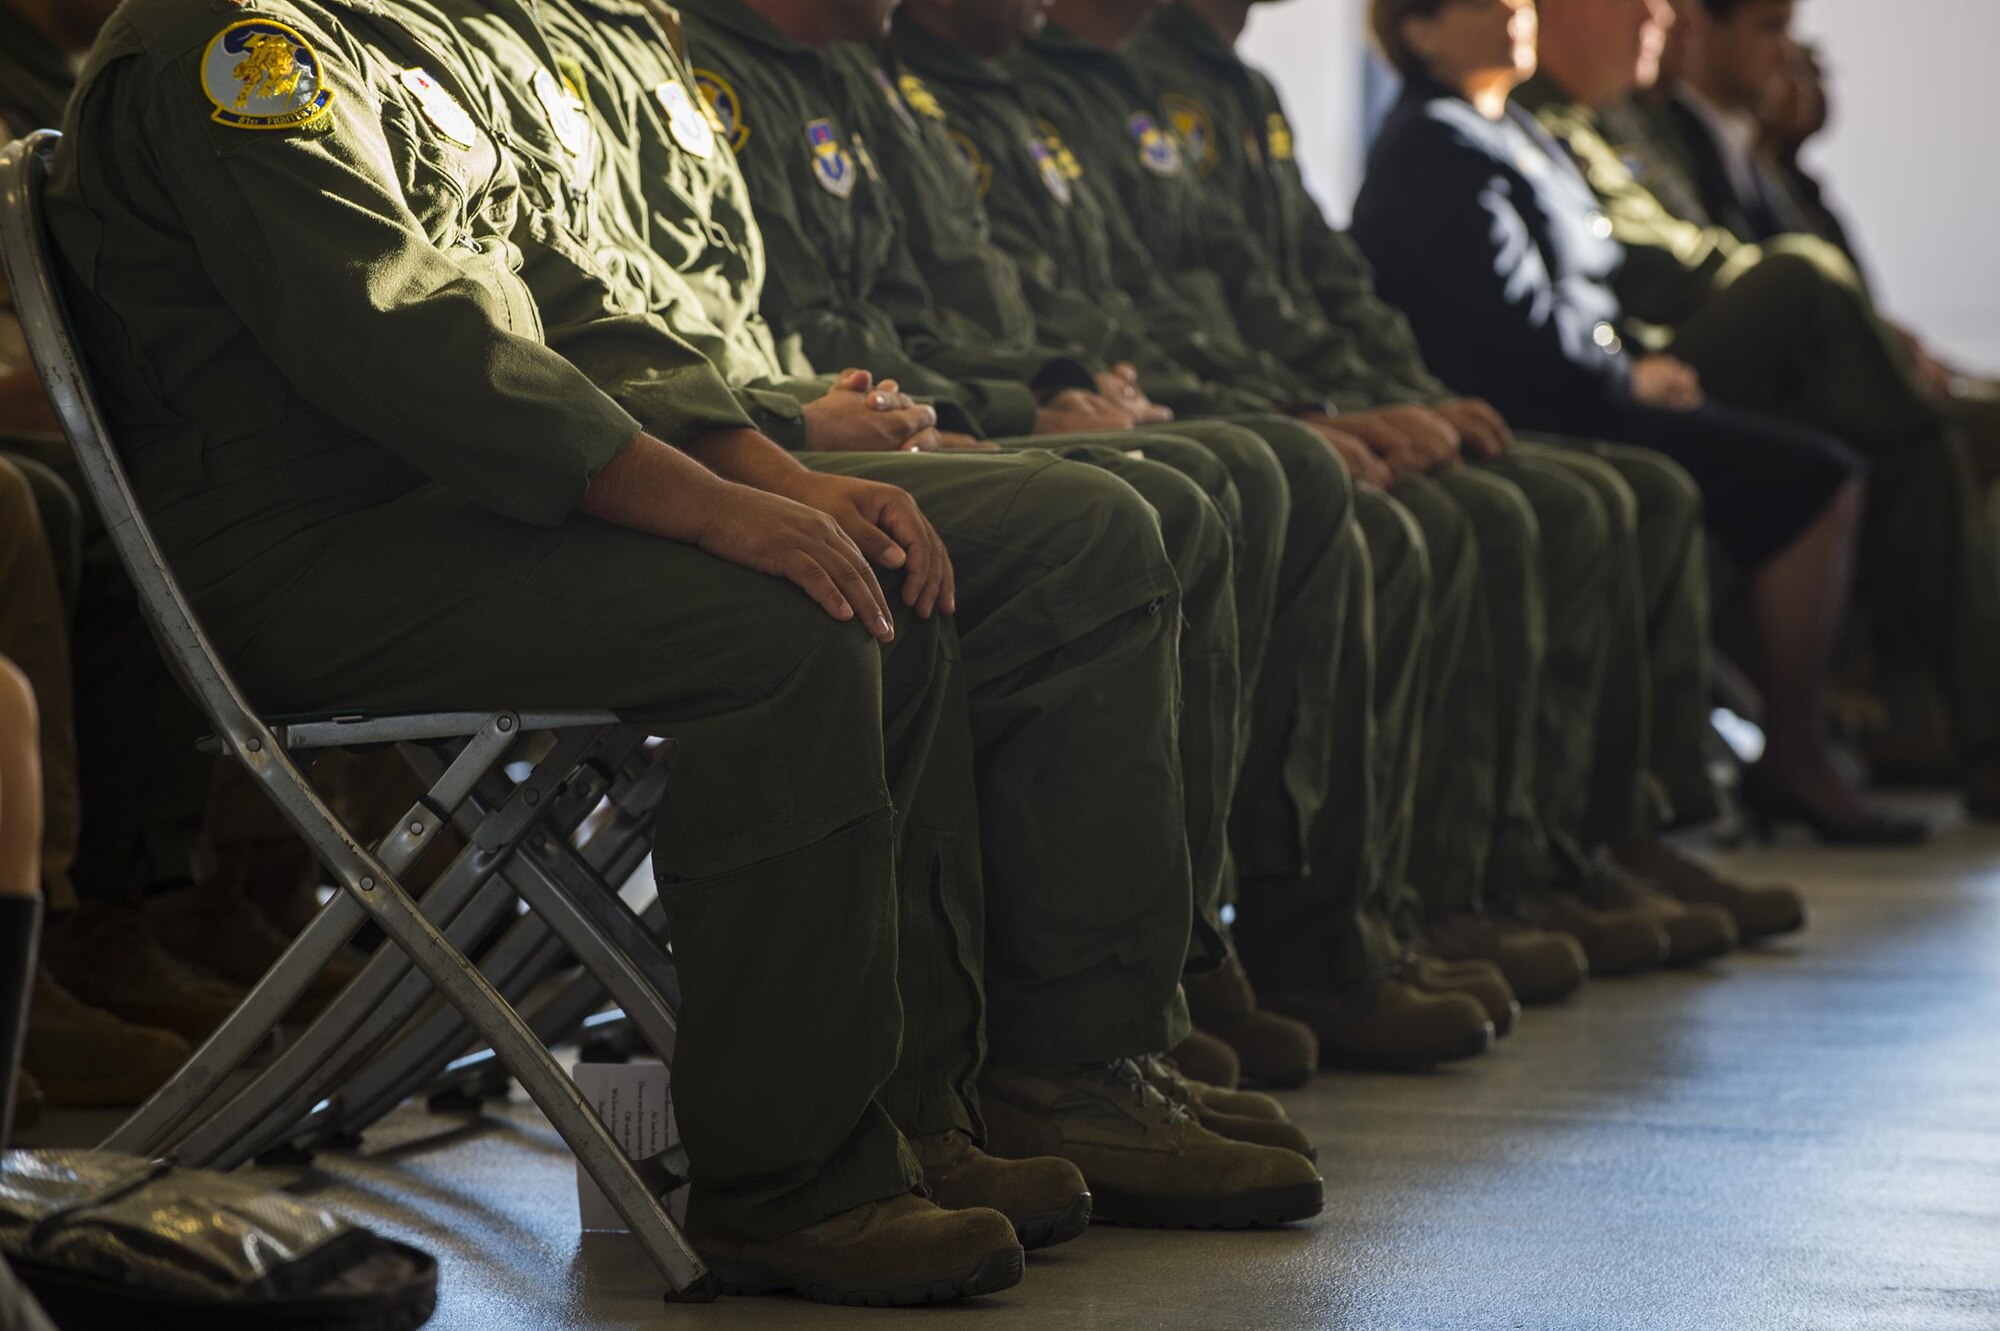 Afghan air force pilots await as their names are called during the graduation of the first 81st Fighter Squadron’s student pilot class, Dec. 18, 2015, at Moody Air Force Base, Ga. The 81st FS will train a total of 30 Afghan pilots and 90 Afghan maintainers over the next three years. (U.S. Air Force photo by Senior Airman Ceaira Tinsley/Released)